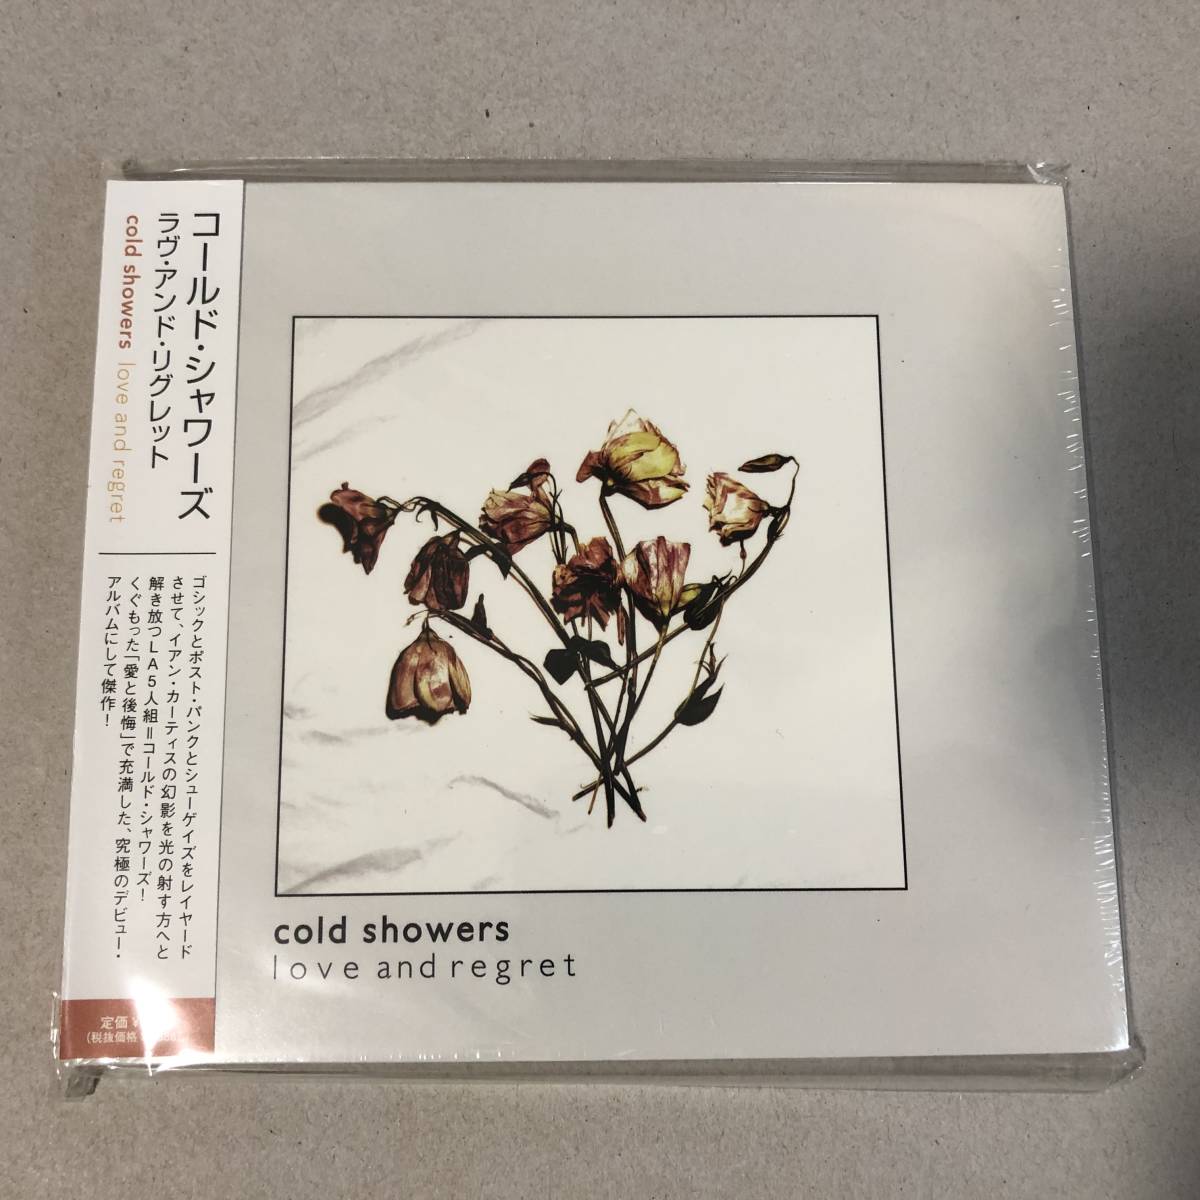 Cold Showers CD Mika Miko Bleached Vivian Girls La Sera Post Punk Indie Rock ポストパンク インディーロック_画像1